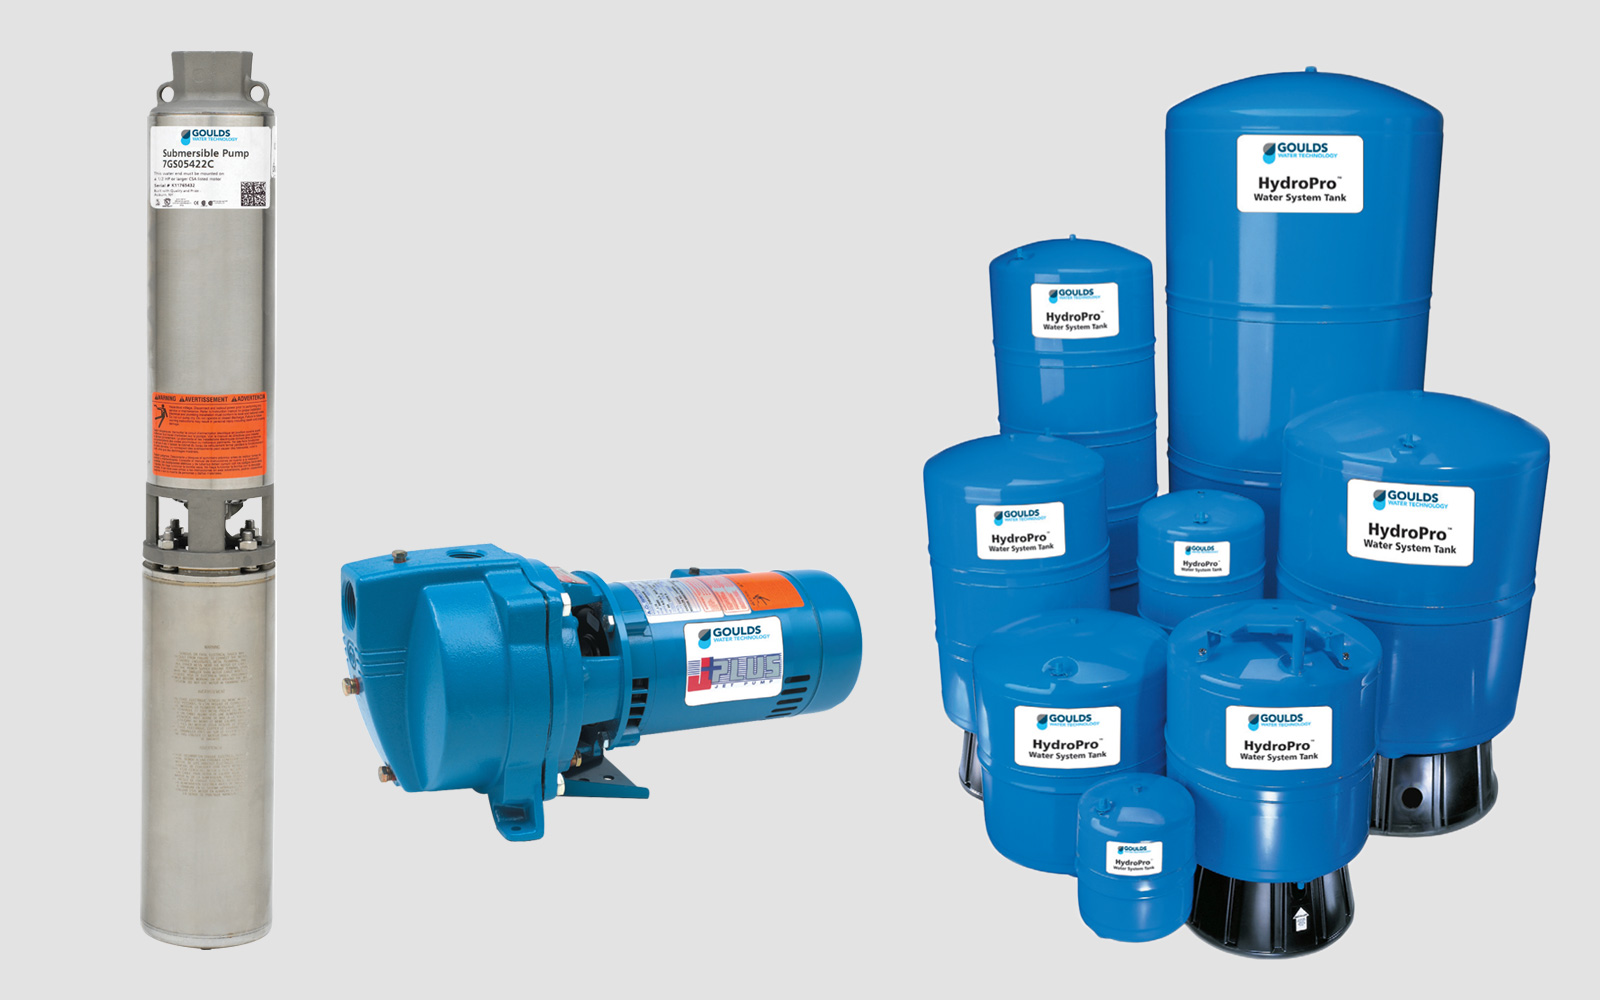 Photo of Goulds Submersible Pump, Goulds J5SH Self-Priming Jet Pump, and Goulds HydroPro Water Pressure Tanks